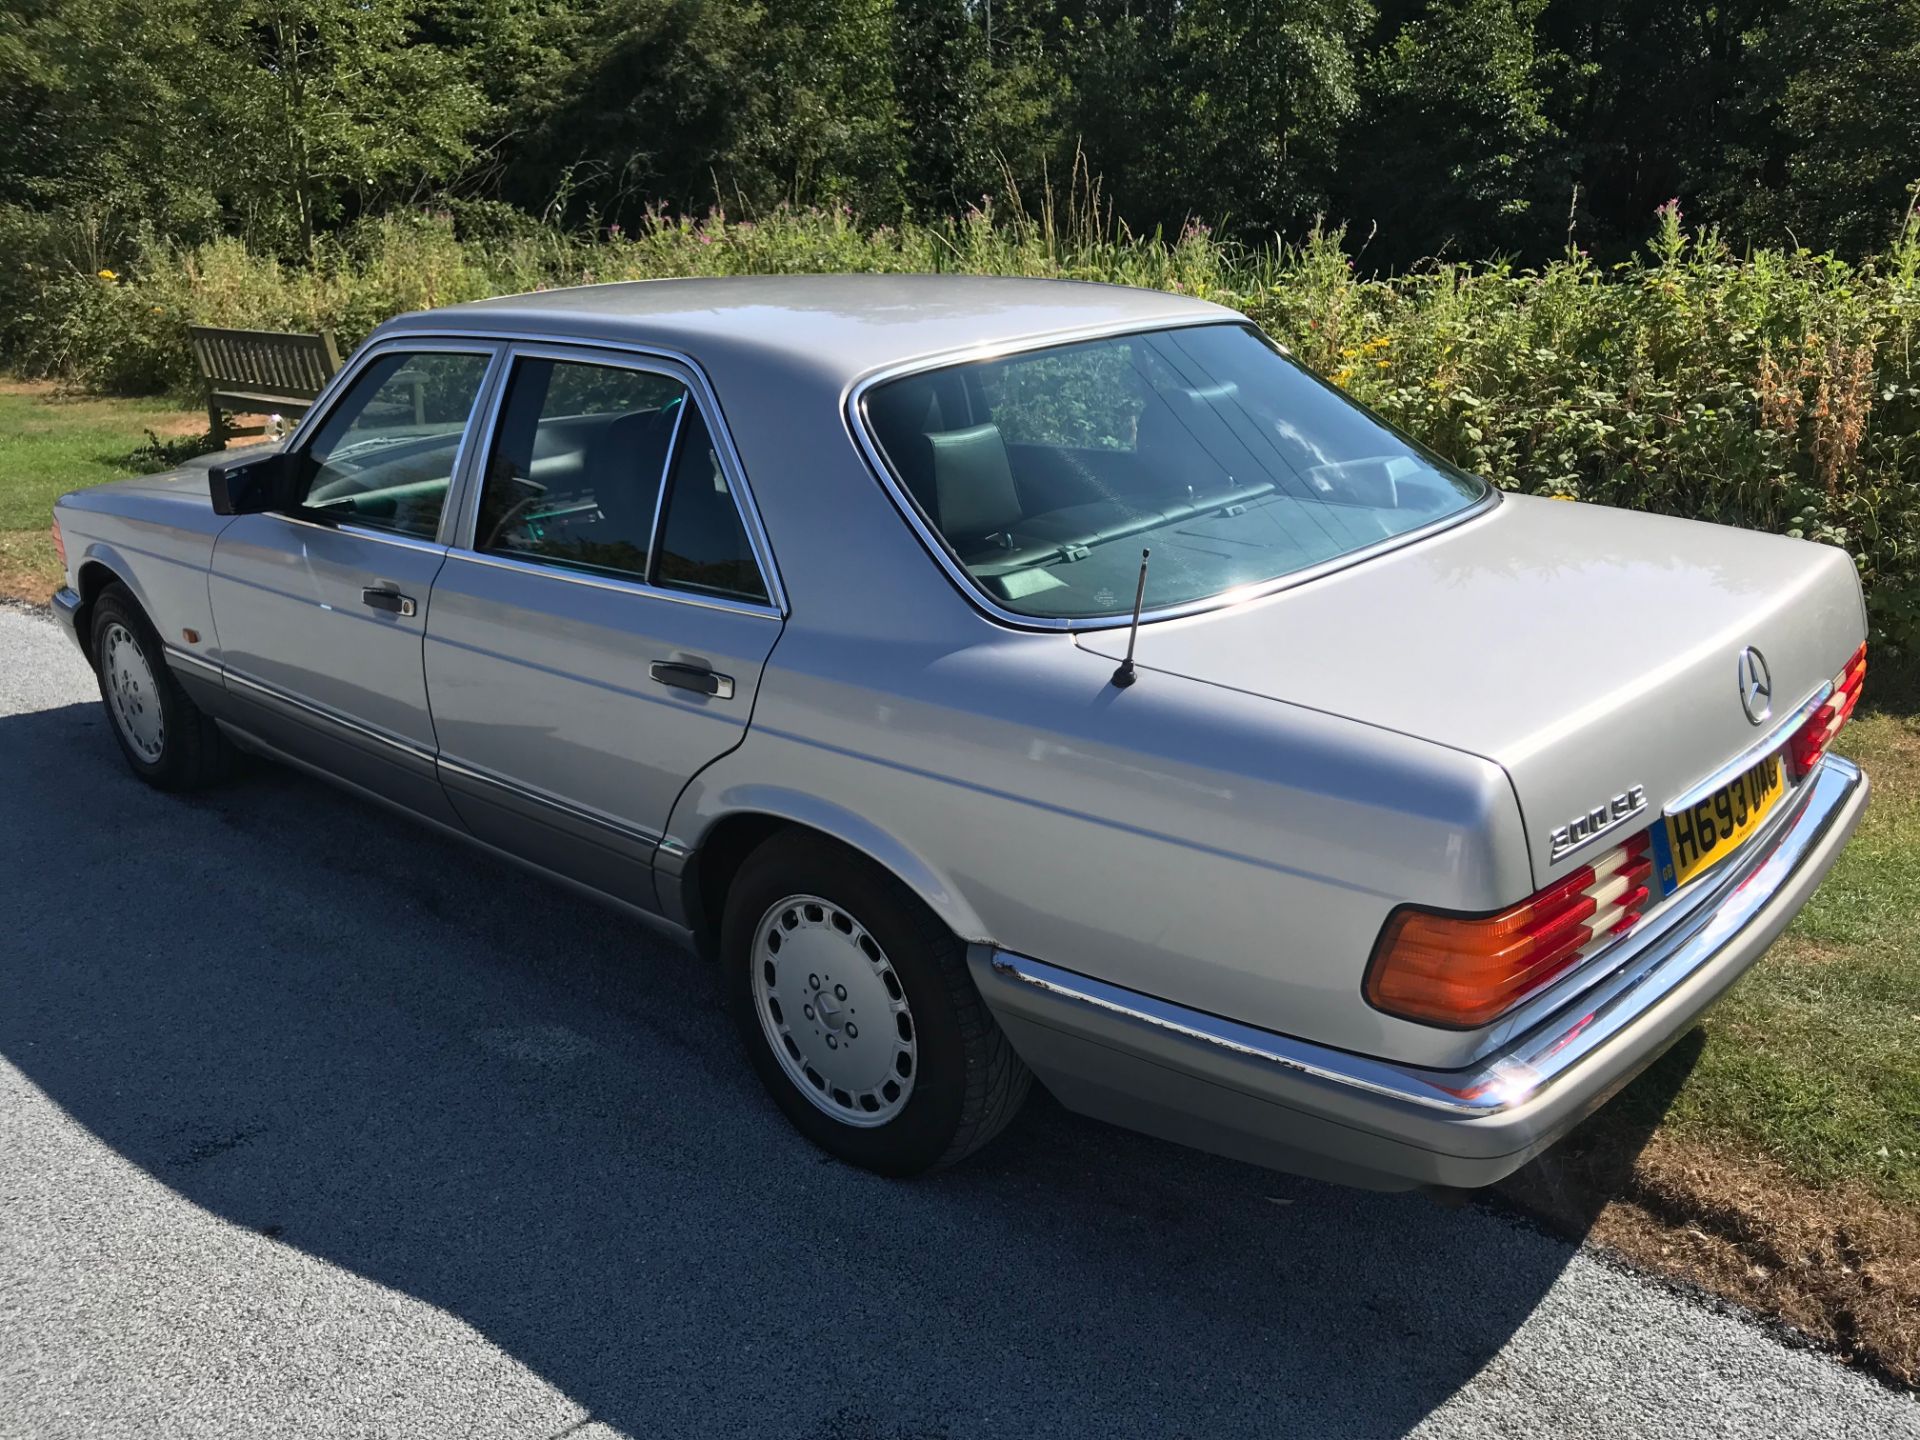 Mercedes 300 SE Automatic - Image 55 of 69